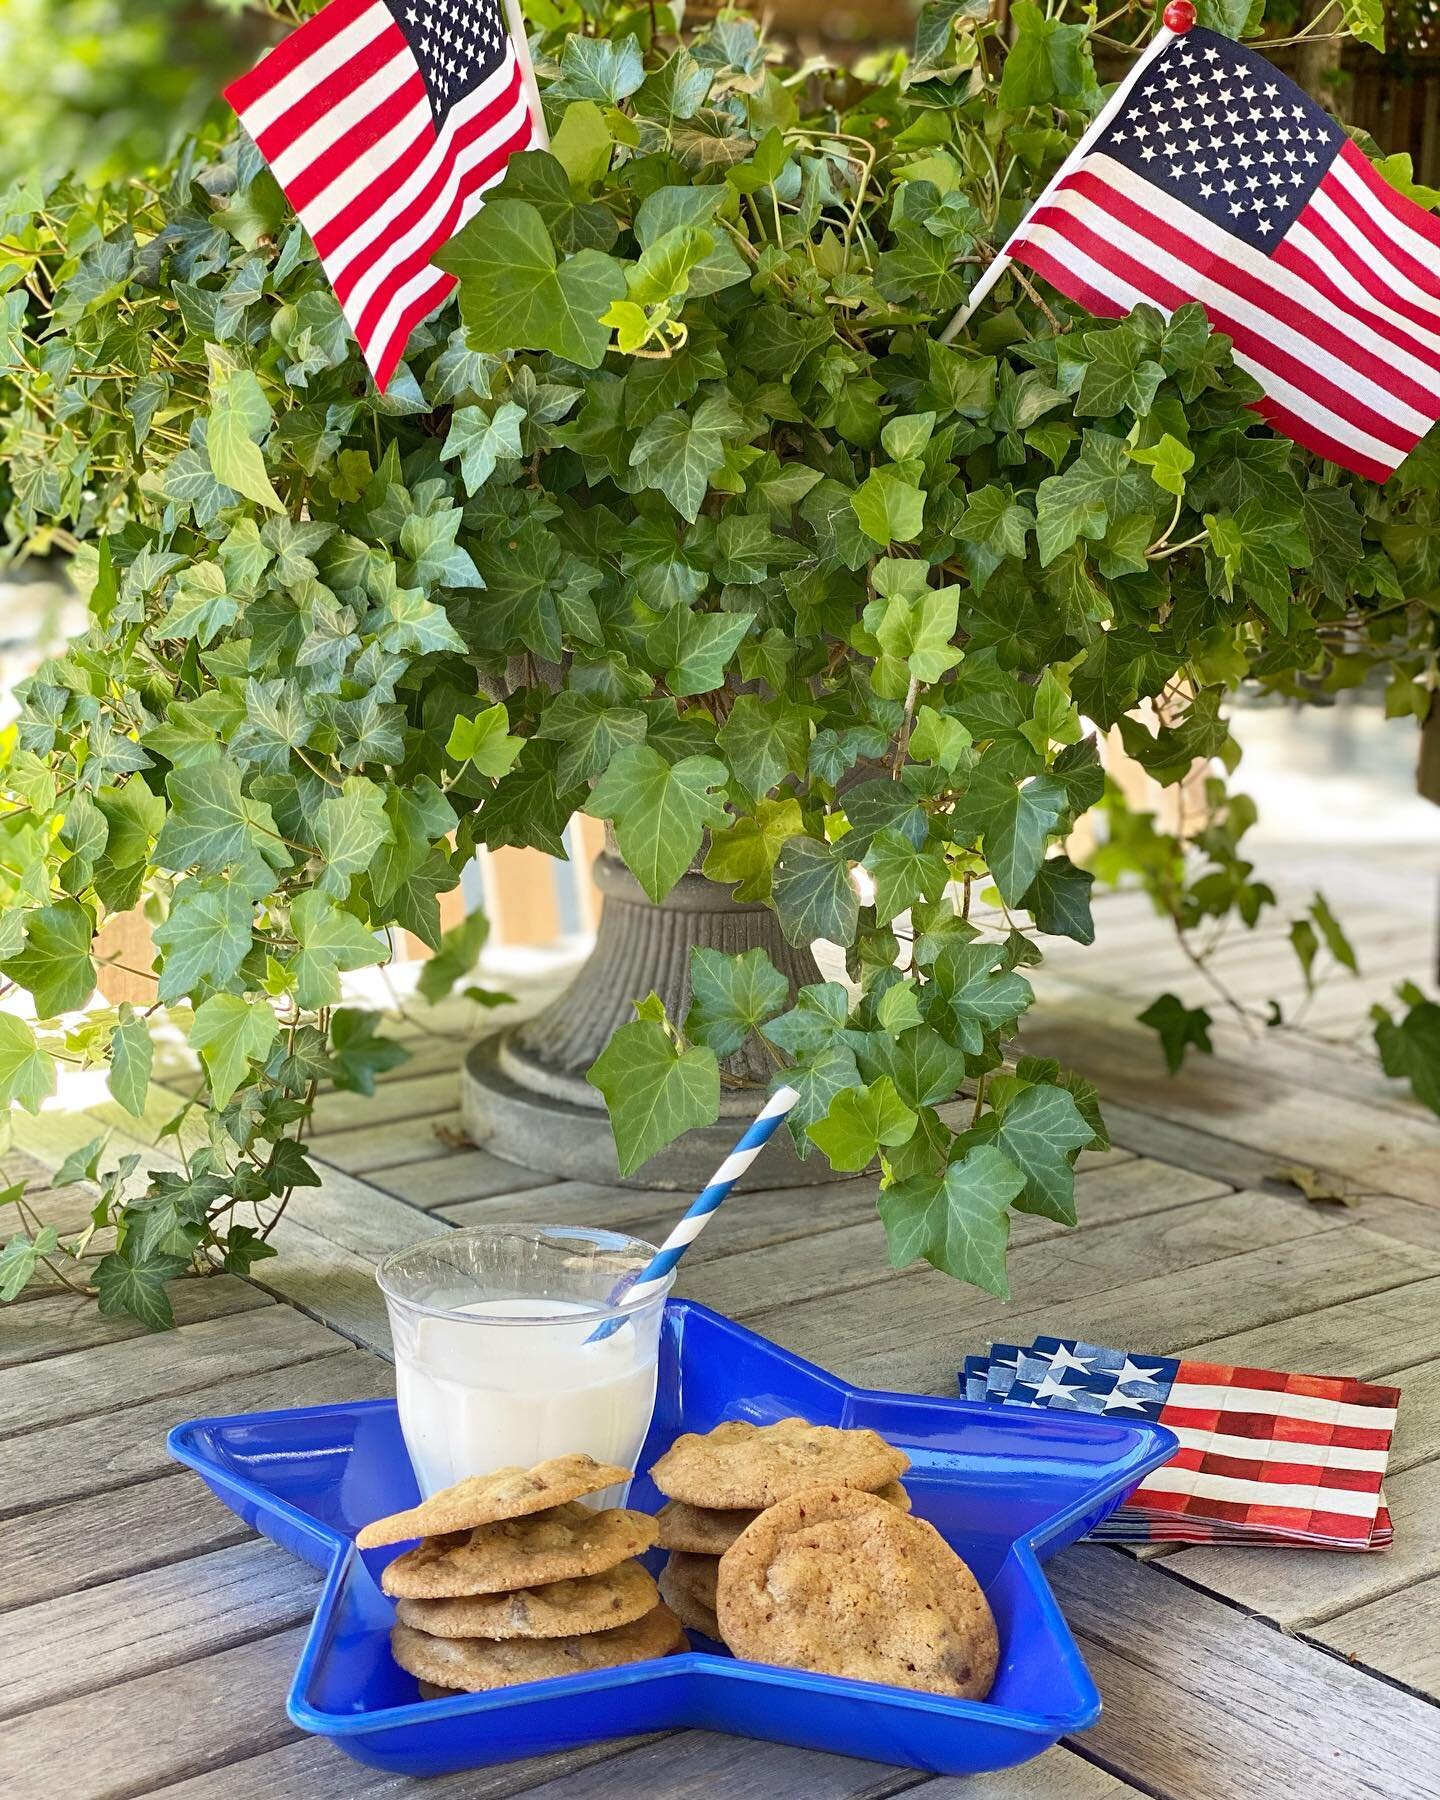 Happy 4th of July weekend!! Have a safe and fun holiday filled with memories, loved ones and lots of cookies! 🇺🇸&hearts;️🍪🤍💙